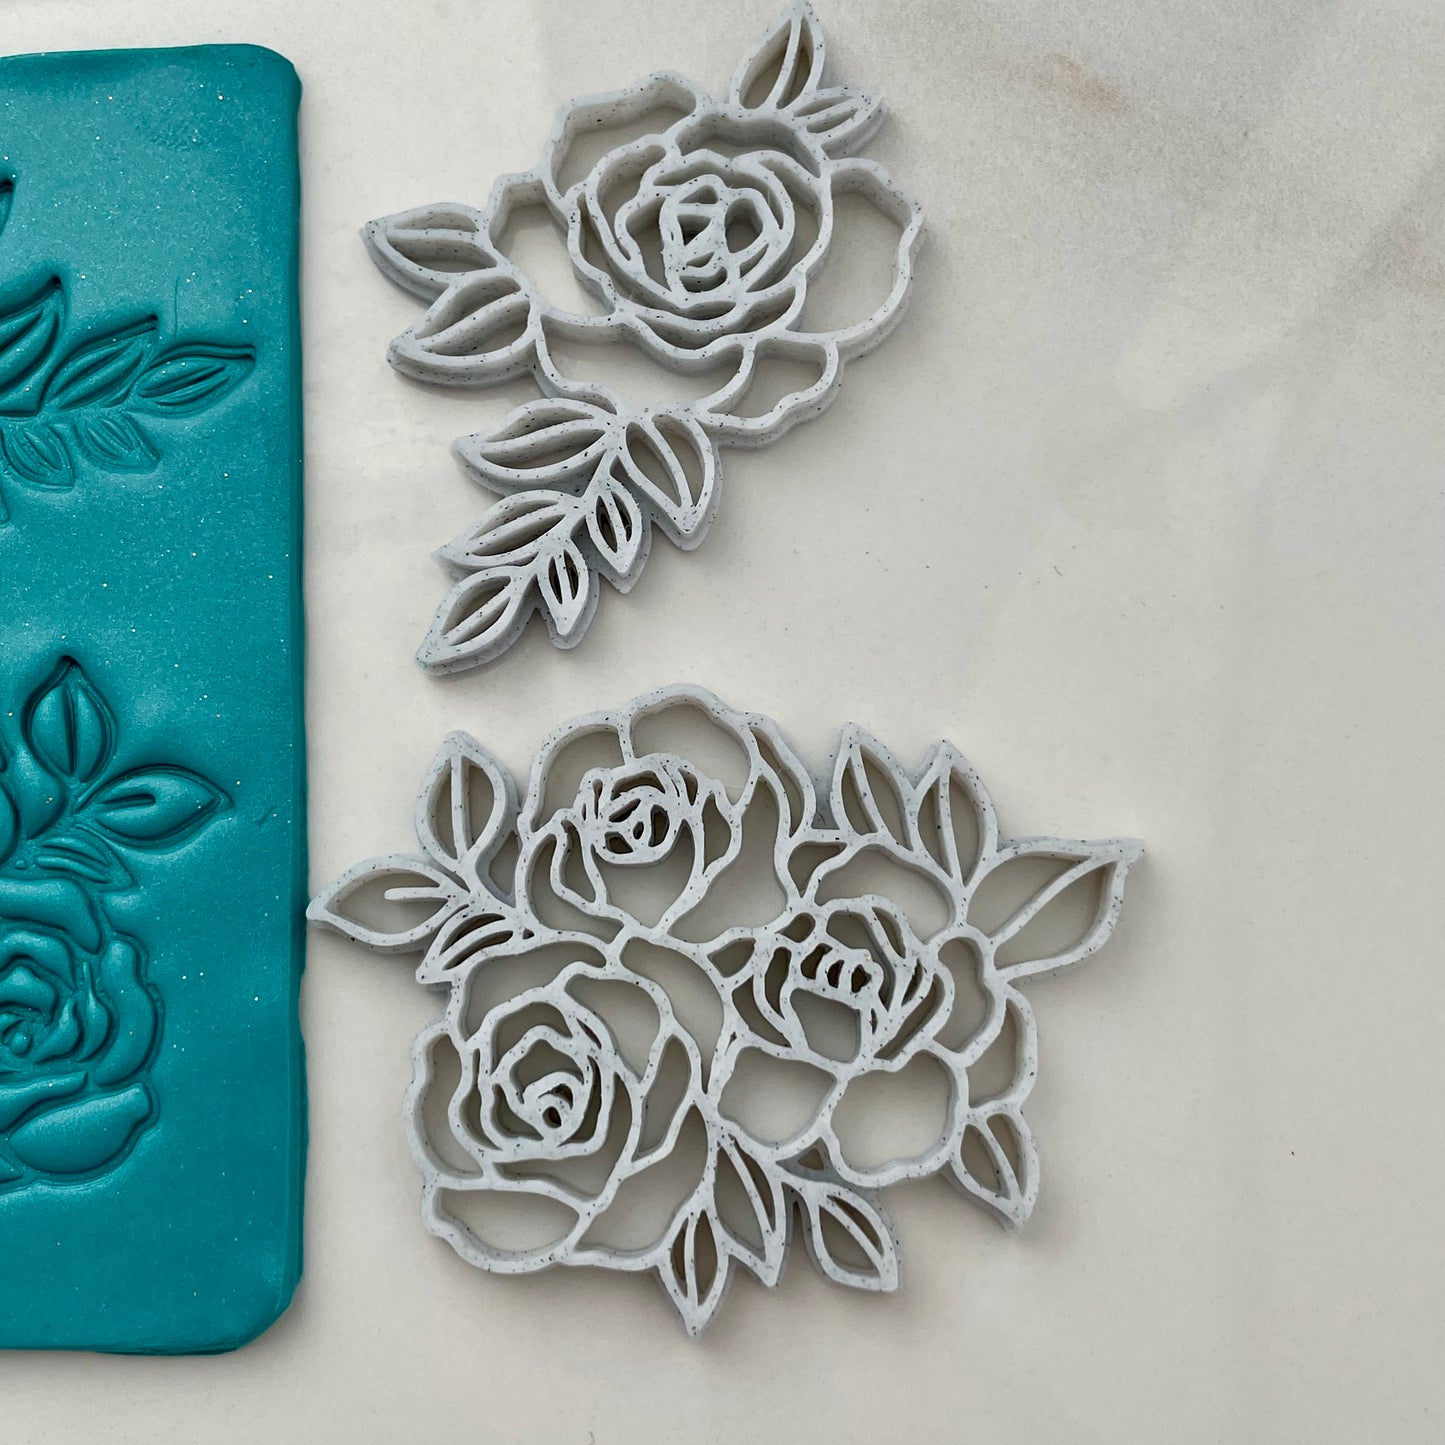 Chunky rose stamps